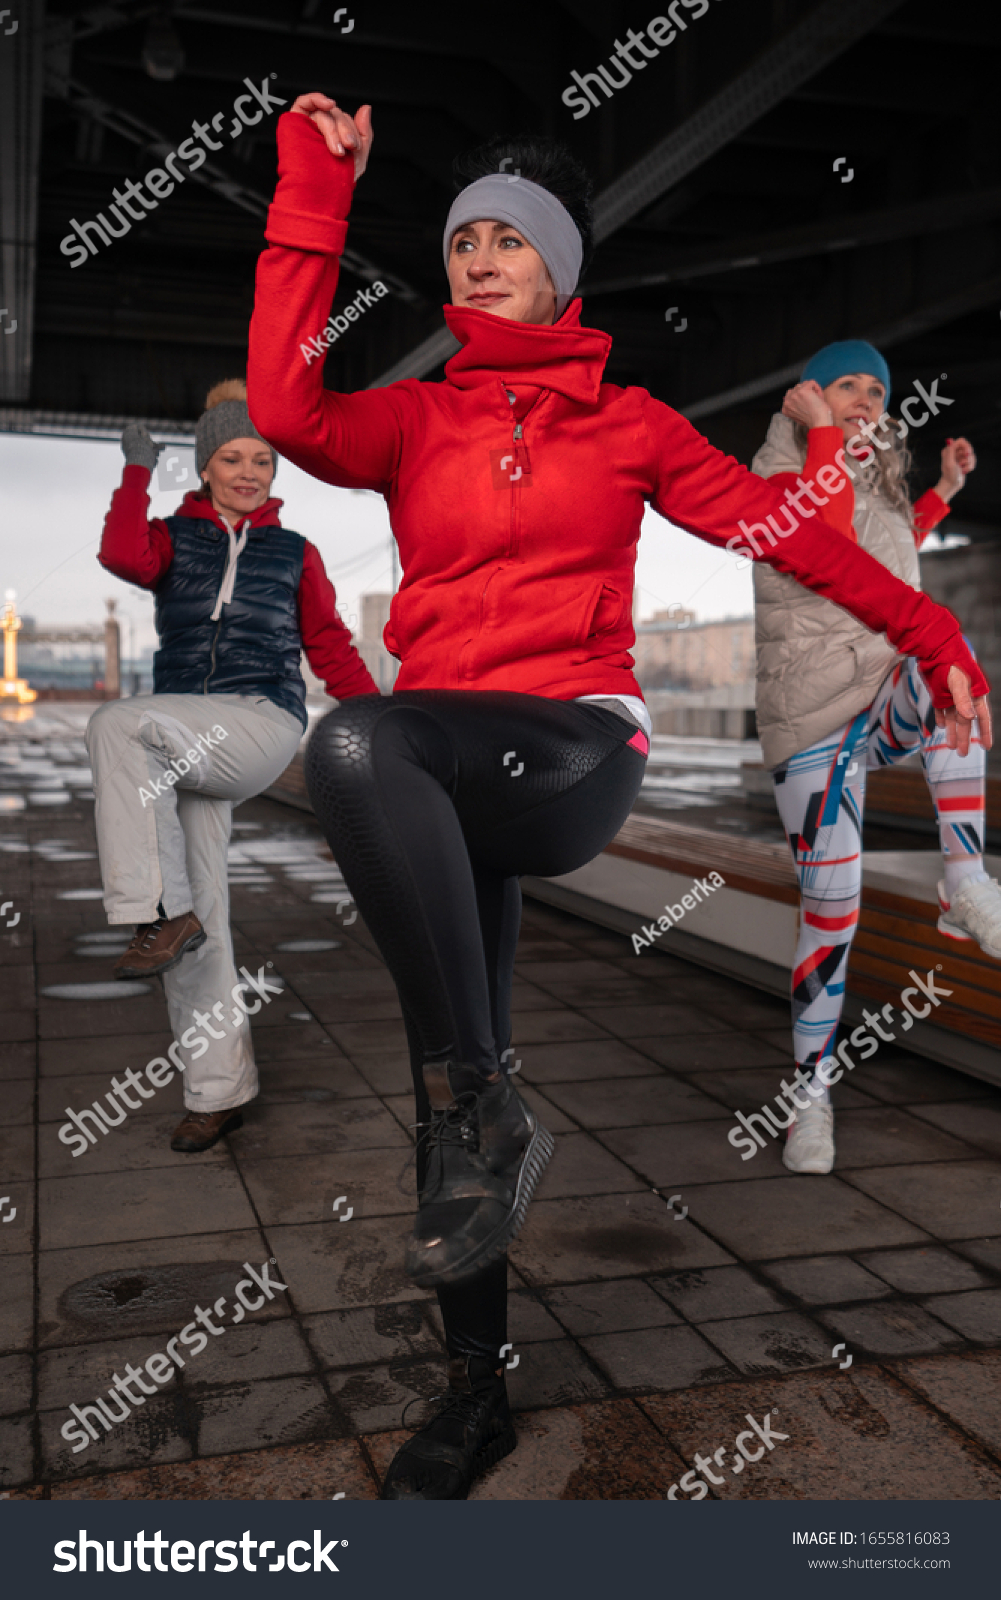 Middle Aged Women Exercising Outdoors In Winter Time. Living Full Life At Senior Age. Diversity and Equity. Beauty In Age  #1655816083